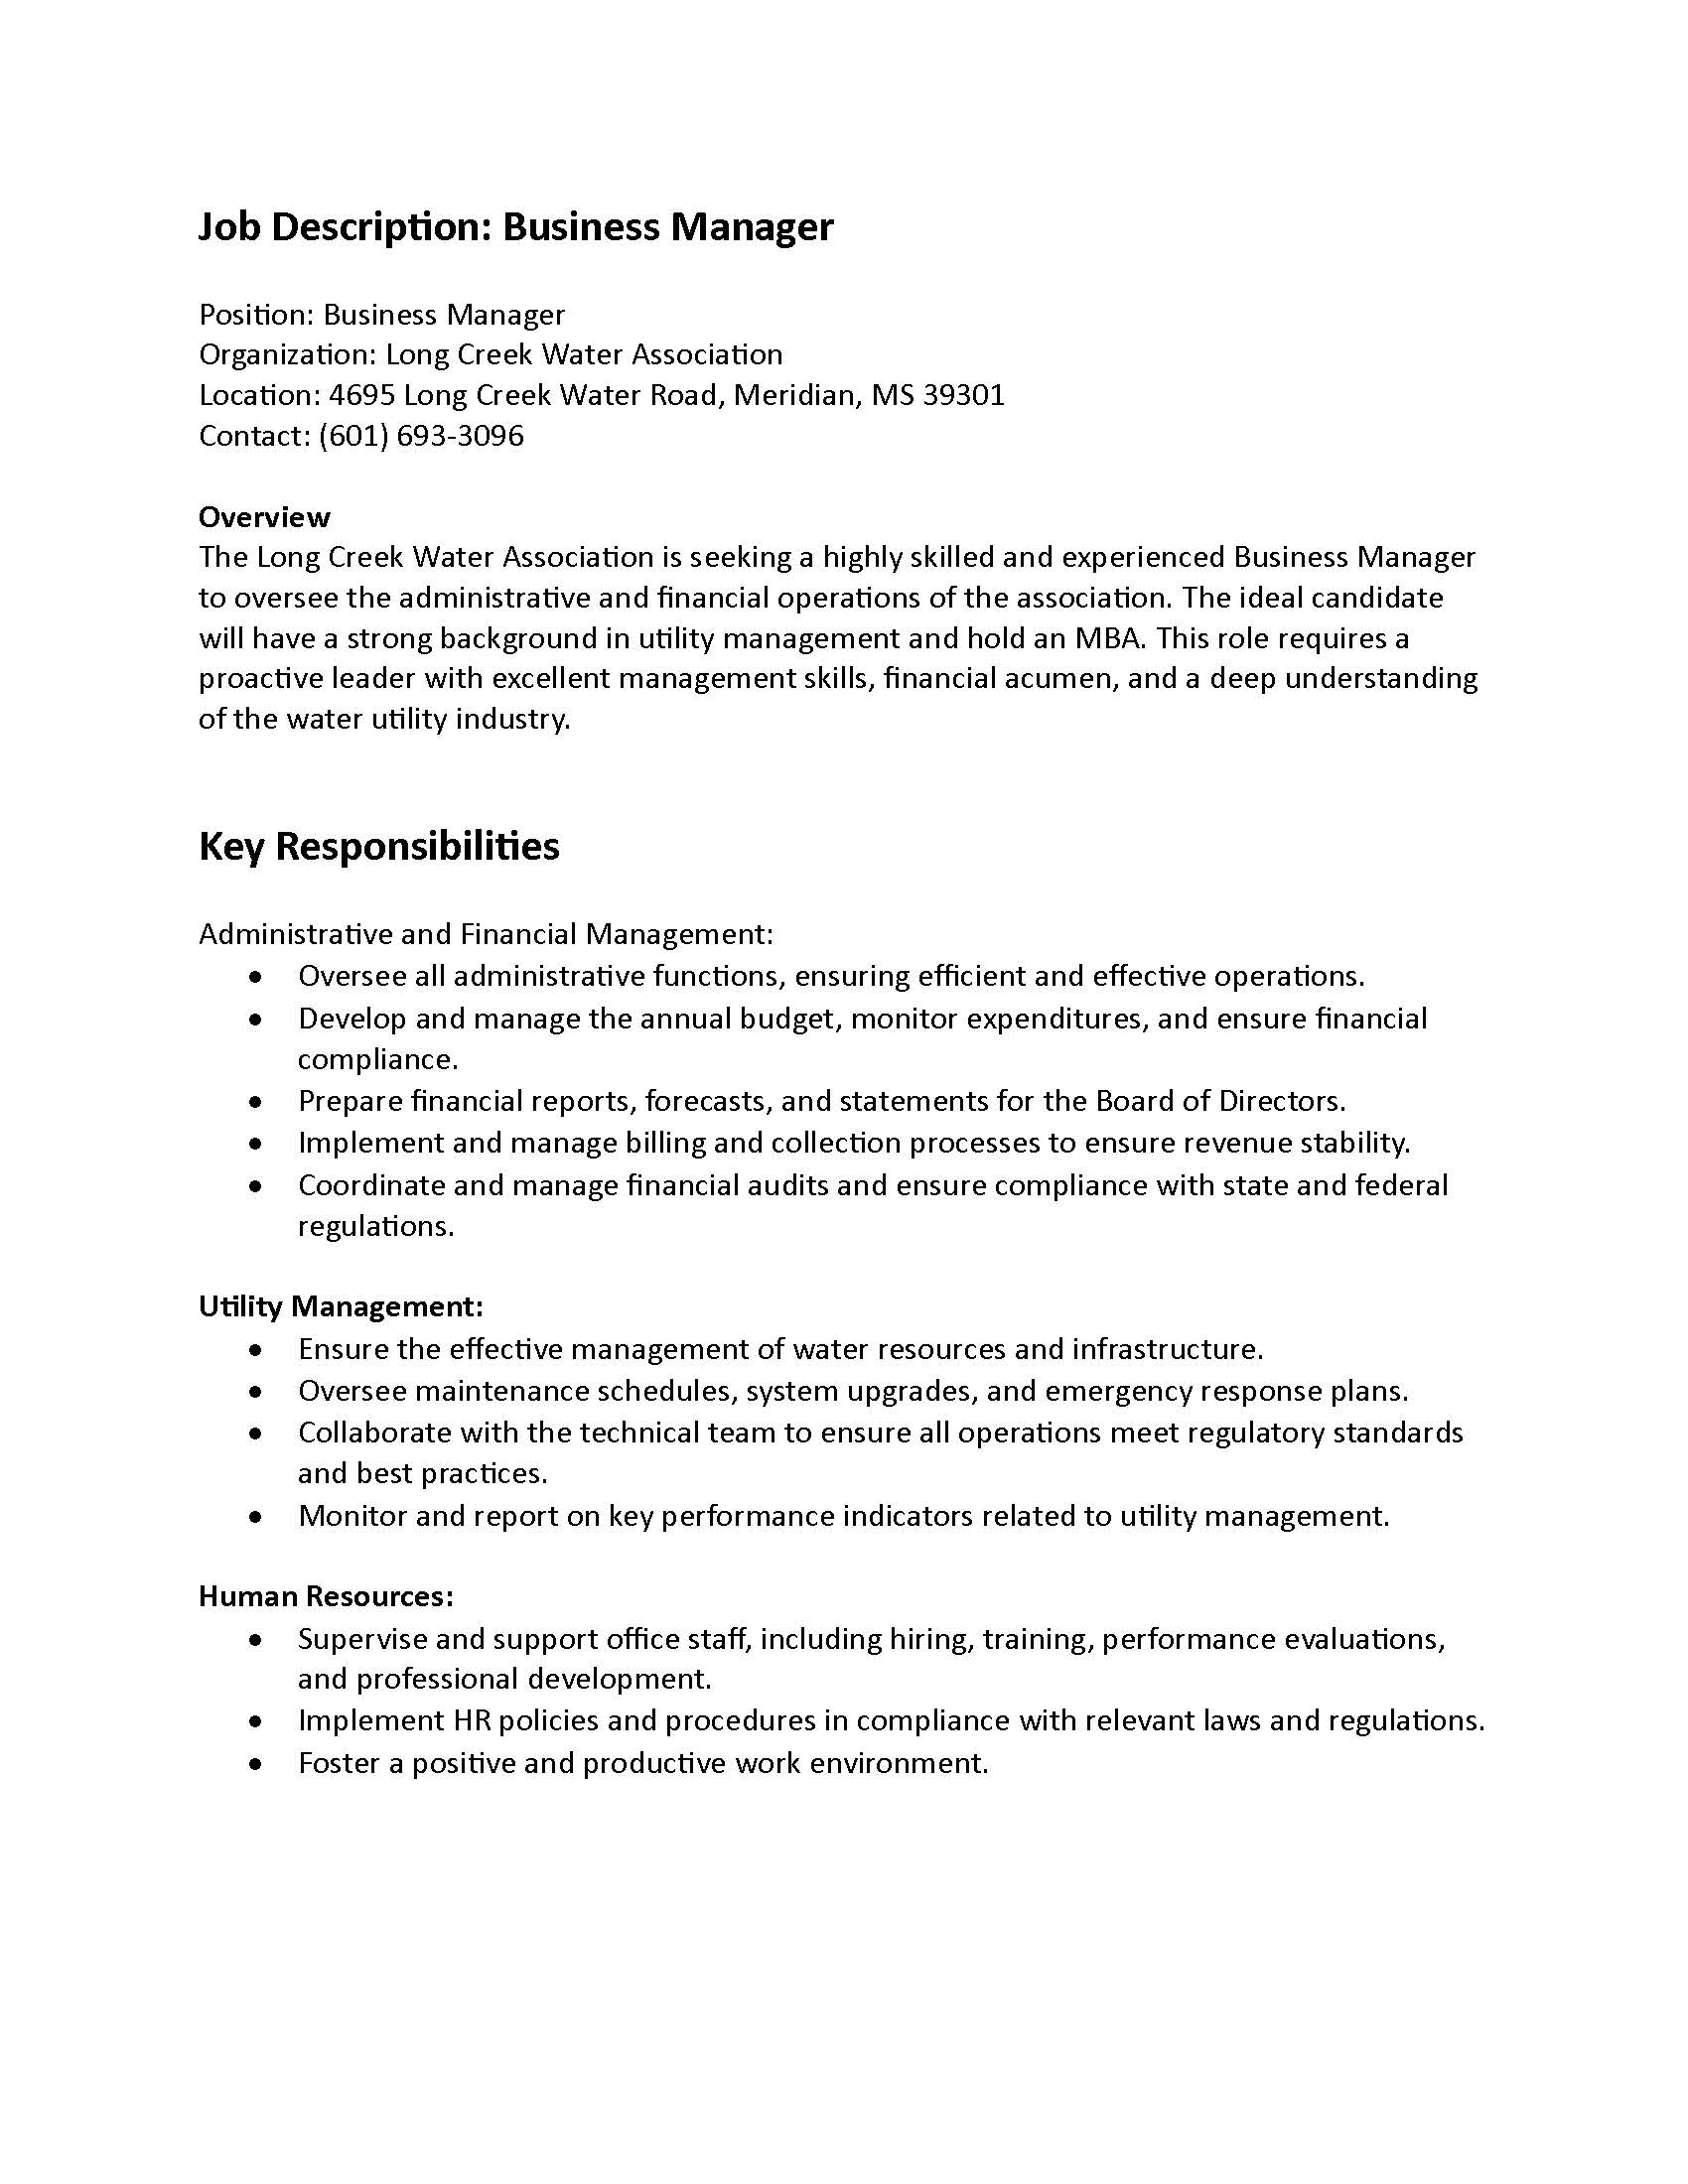 Job Opening - Long Creek Water Association Business Manager Page 1